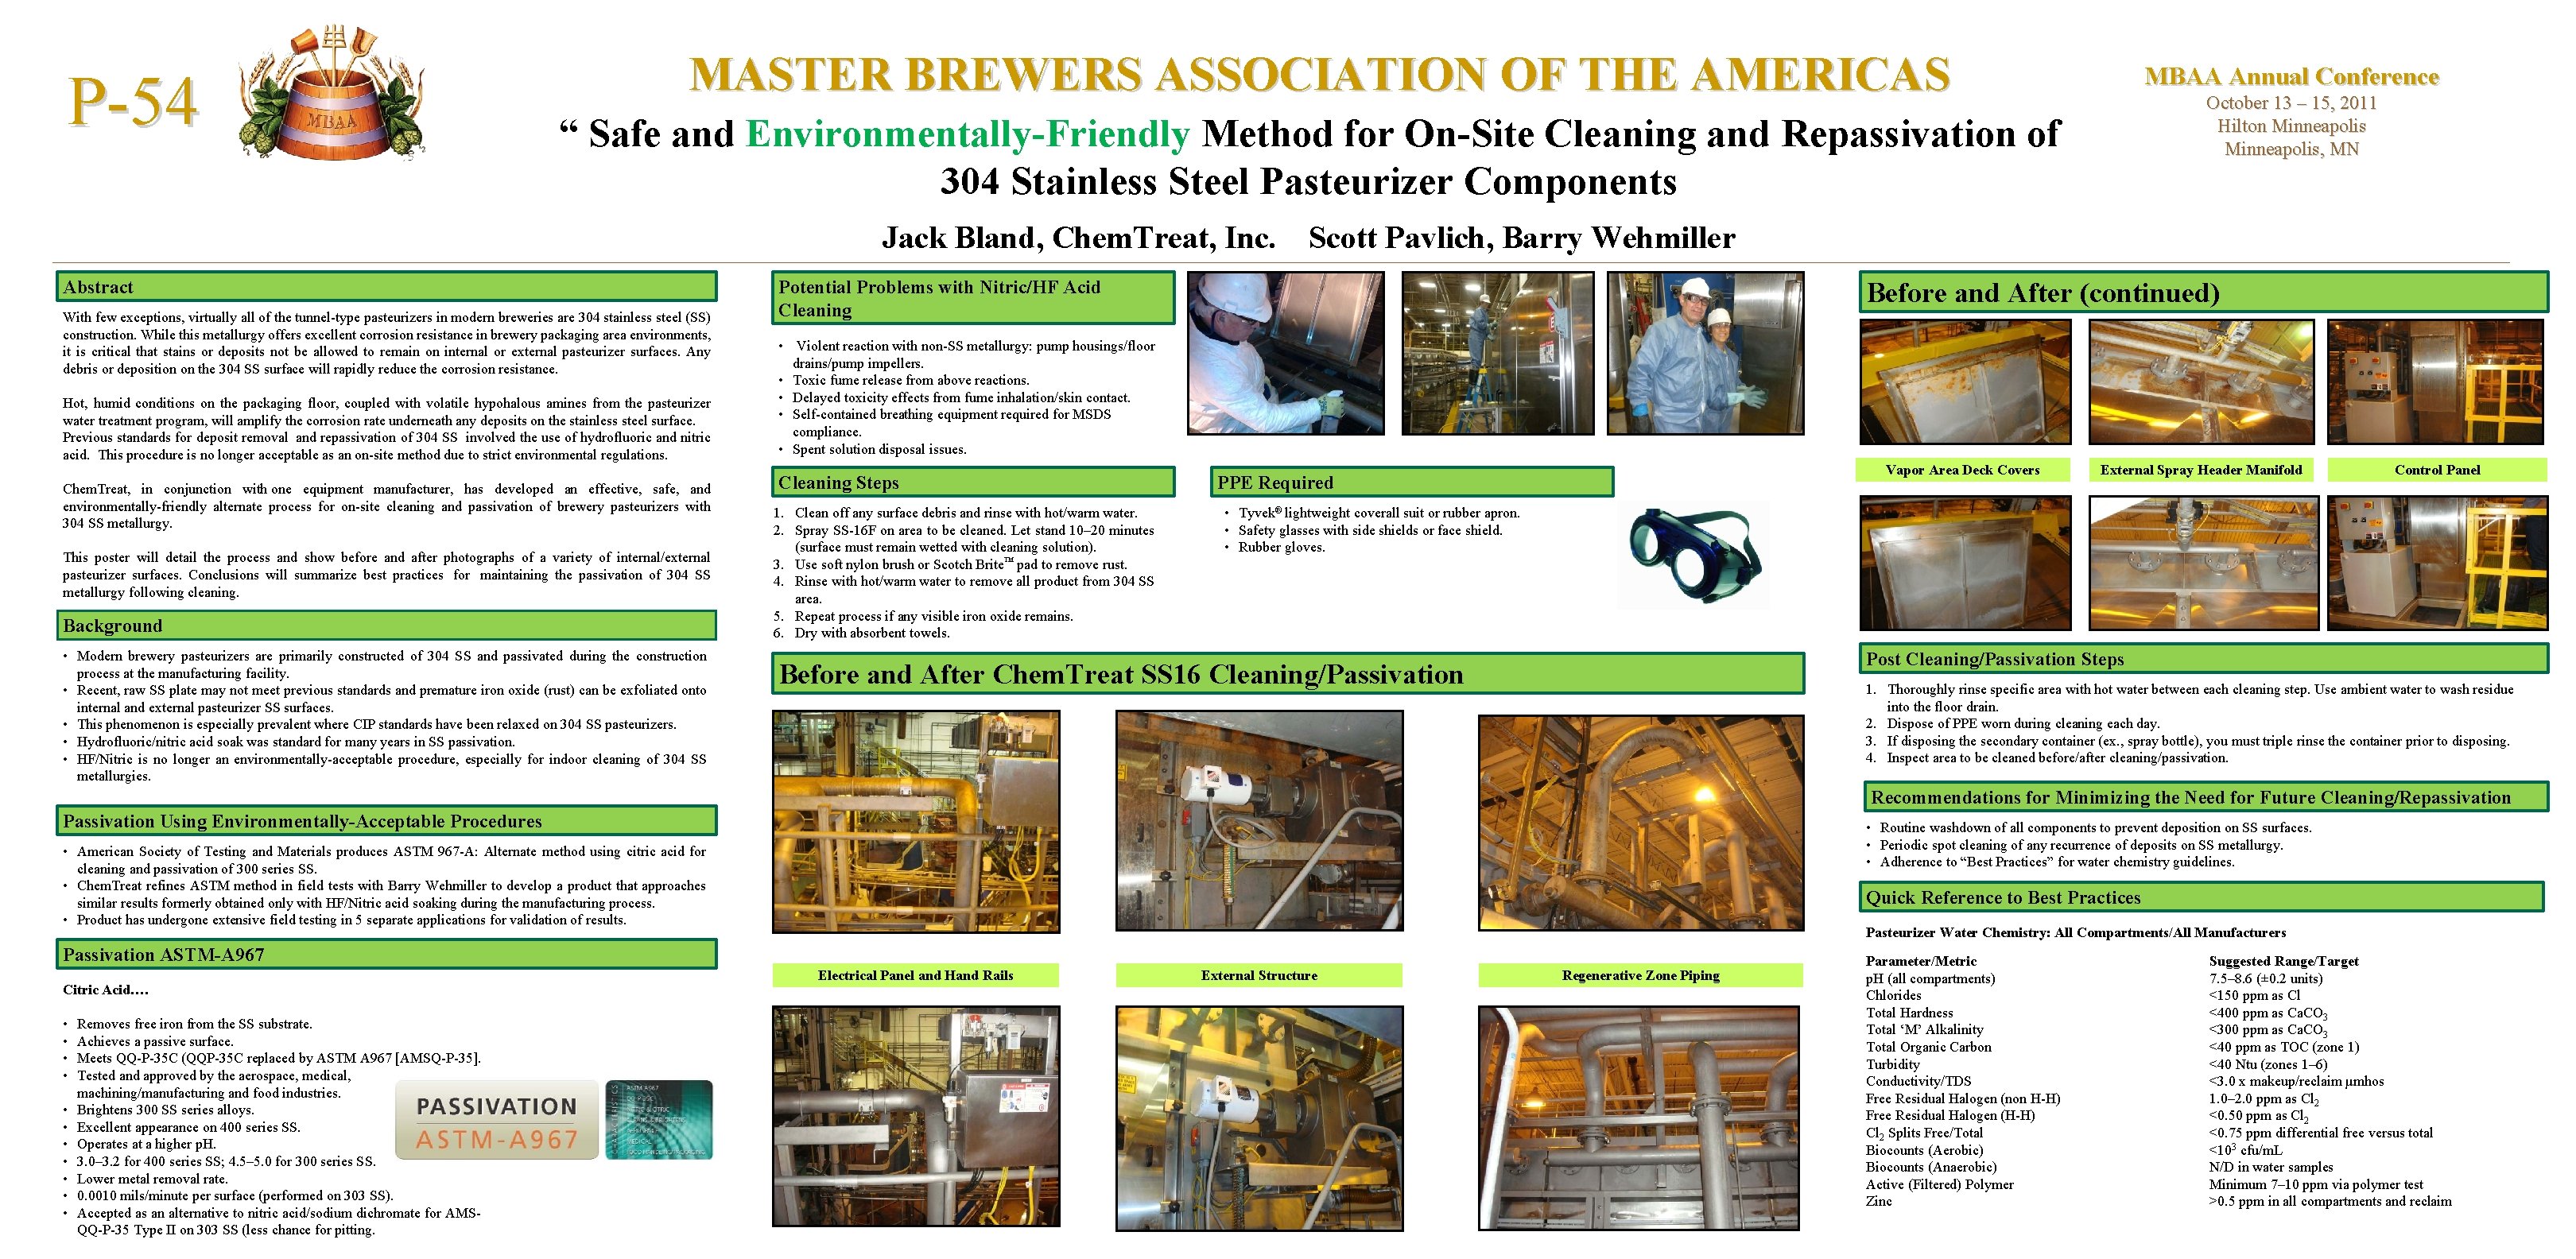 P-54 MASTER BREWERS ASSOCIATION OF THE AMERICAS MBAA Annual Conference October 13 – 15,